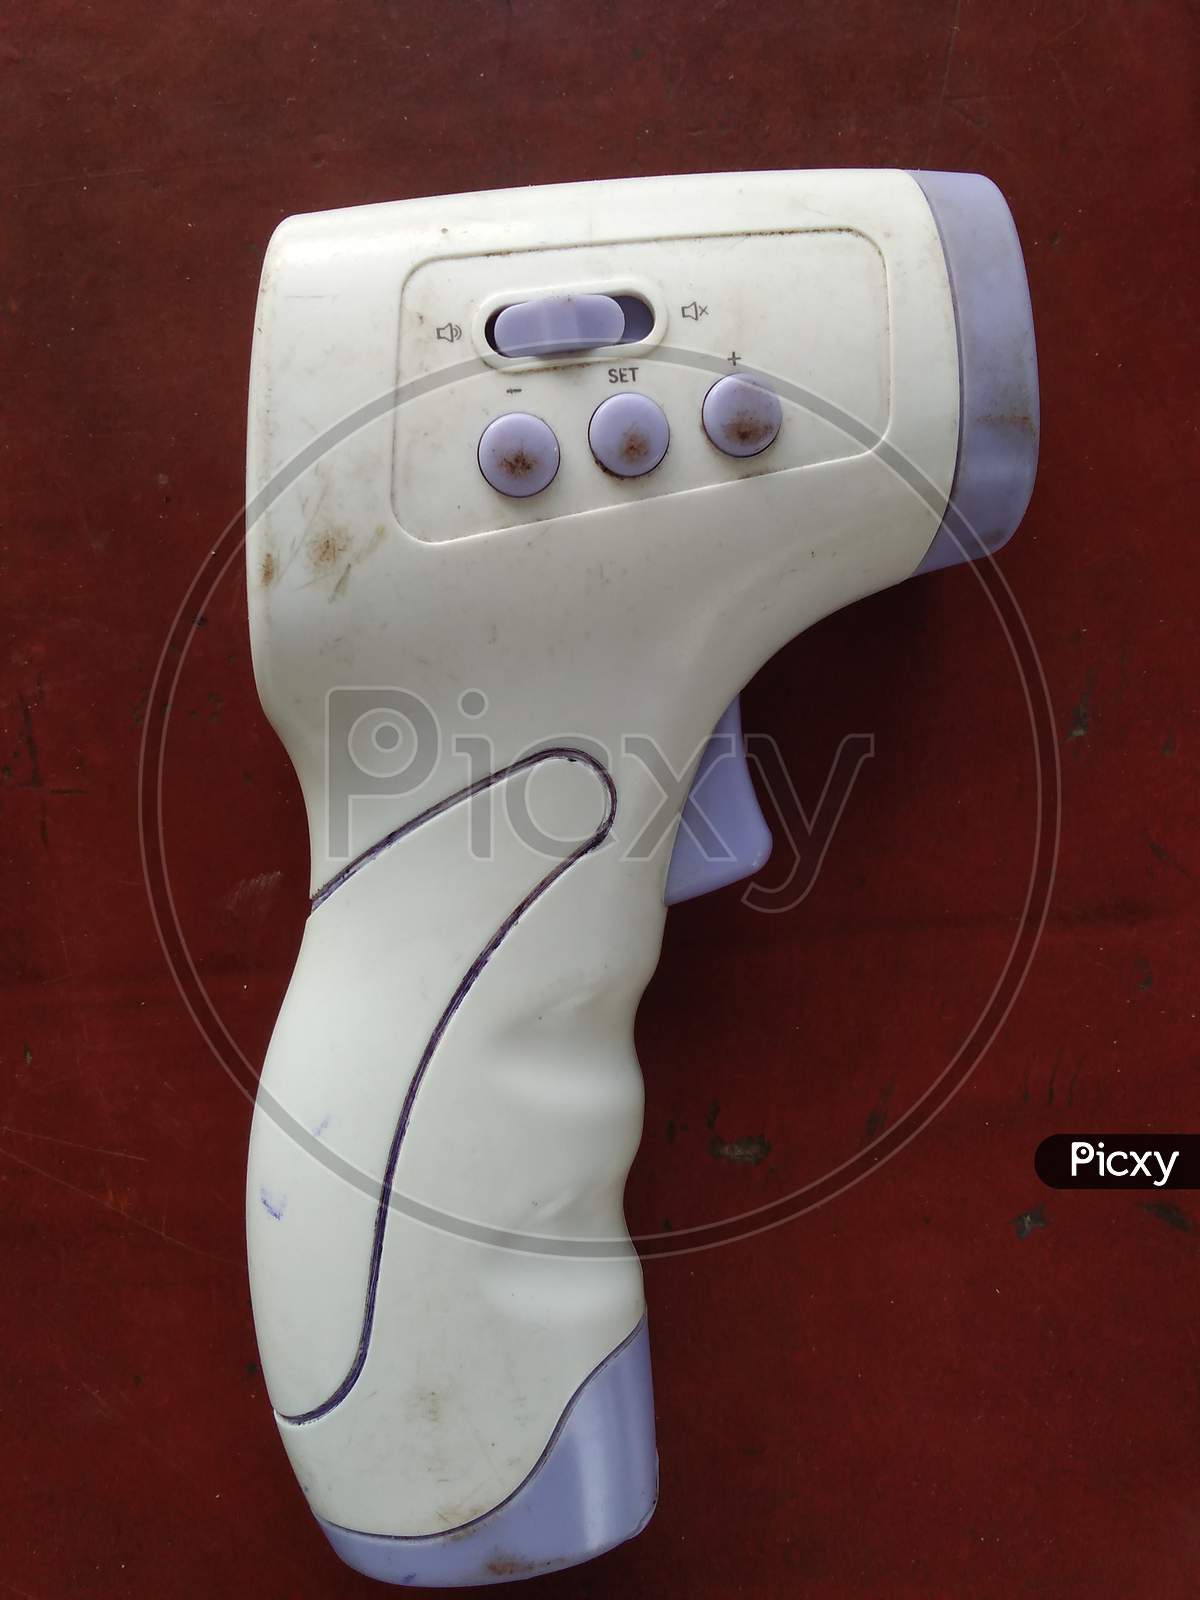 An Infrared Thermometer Used To Find Out The Human Body Temperature As Fever Is One Of The Symptoms Of Covid19 Corona Virus